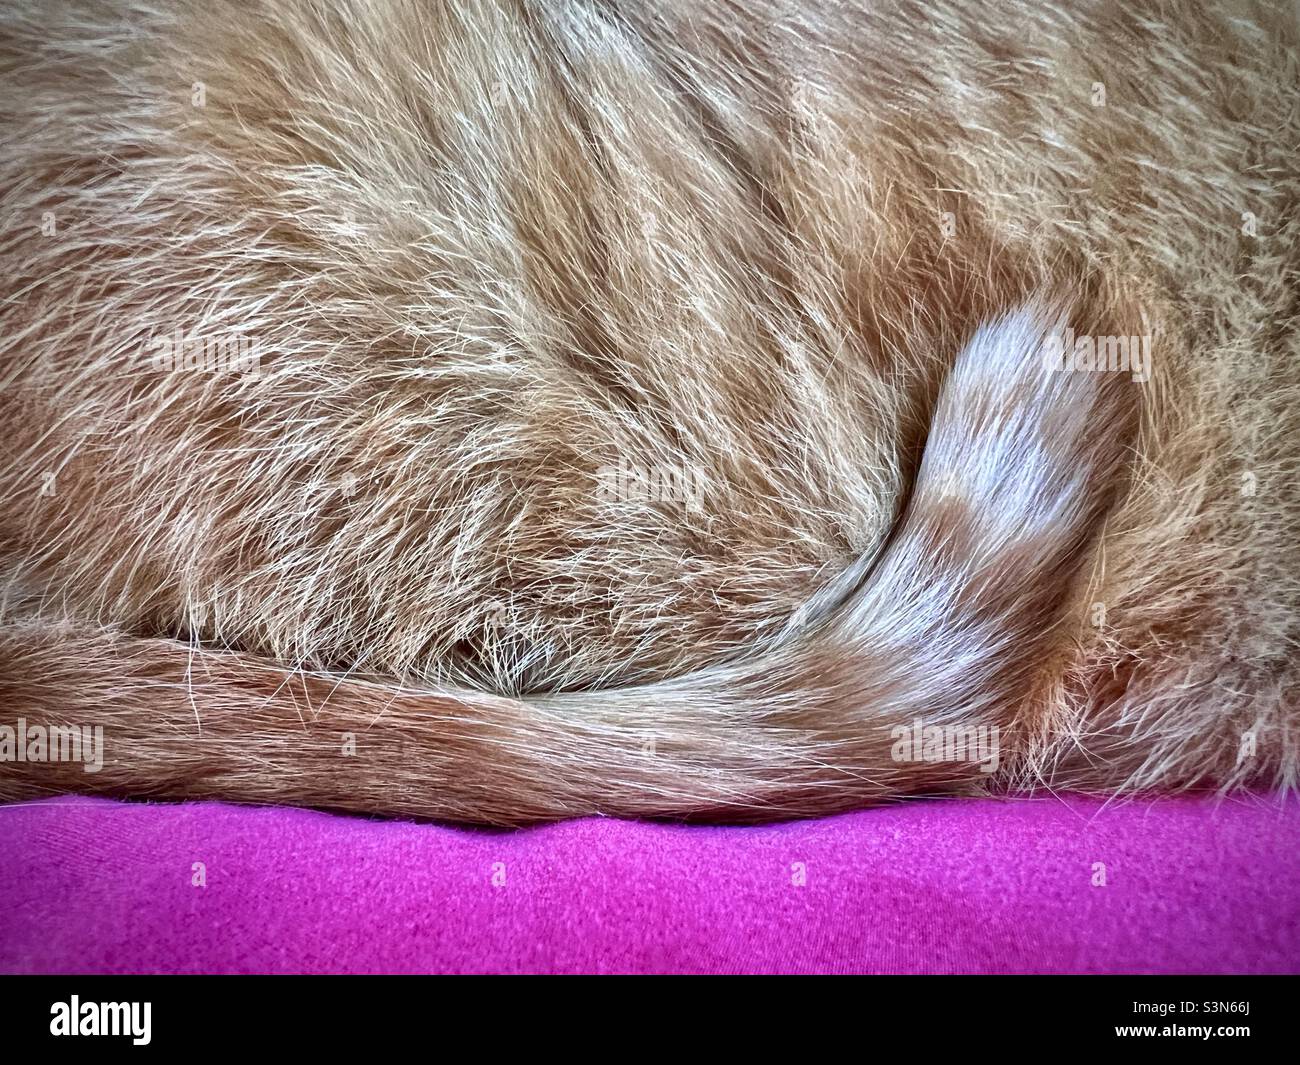 Orange cat napping  with tail curled up Stock Photo